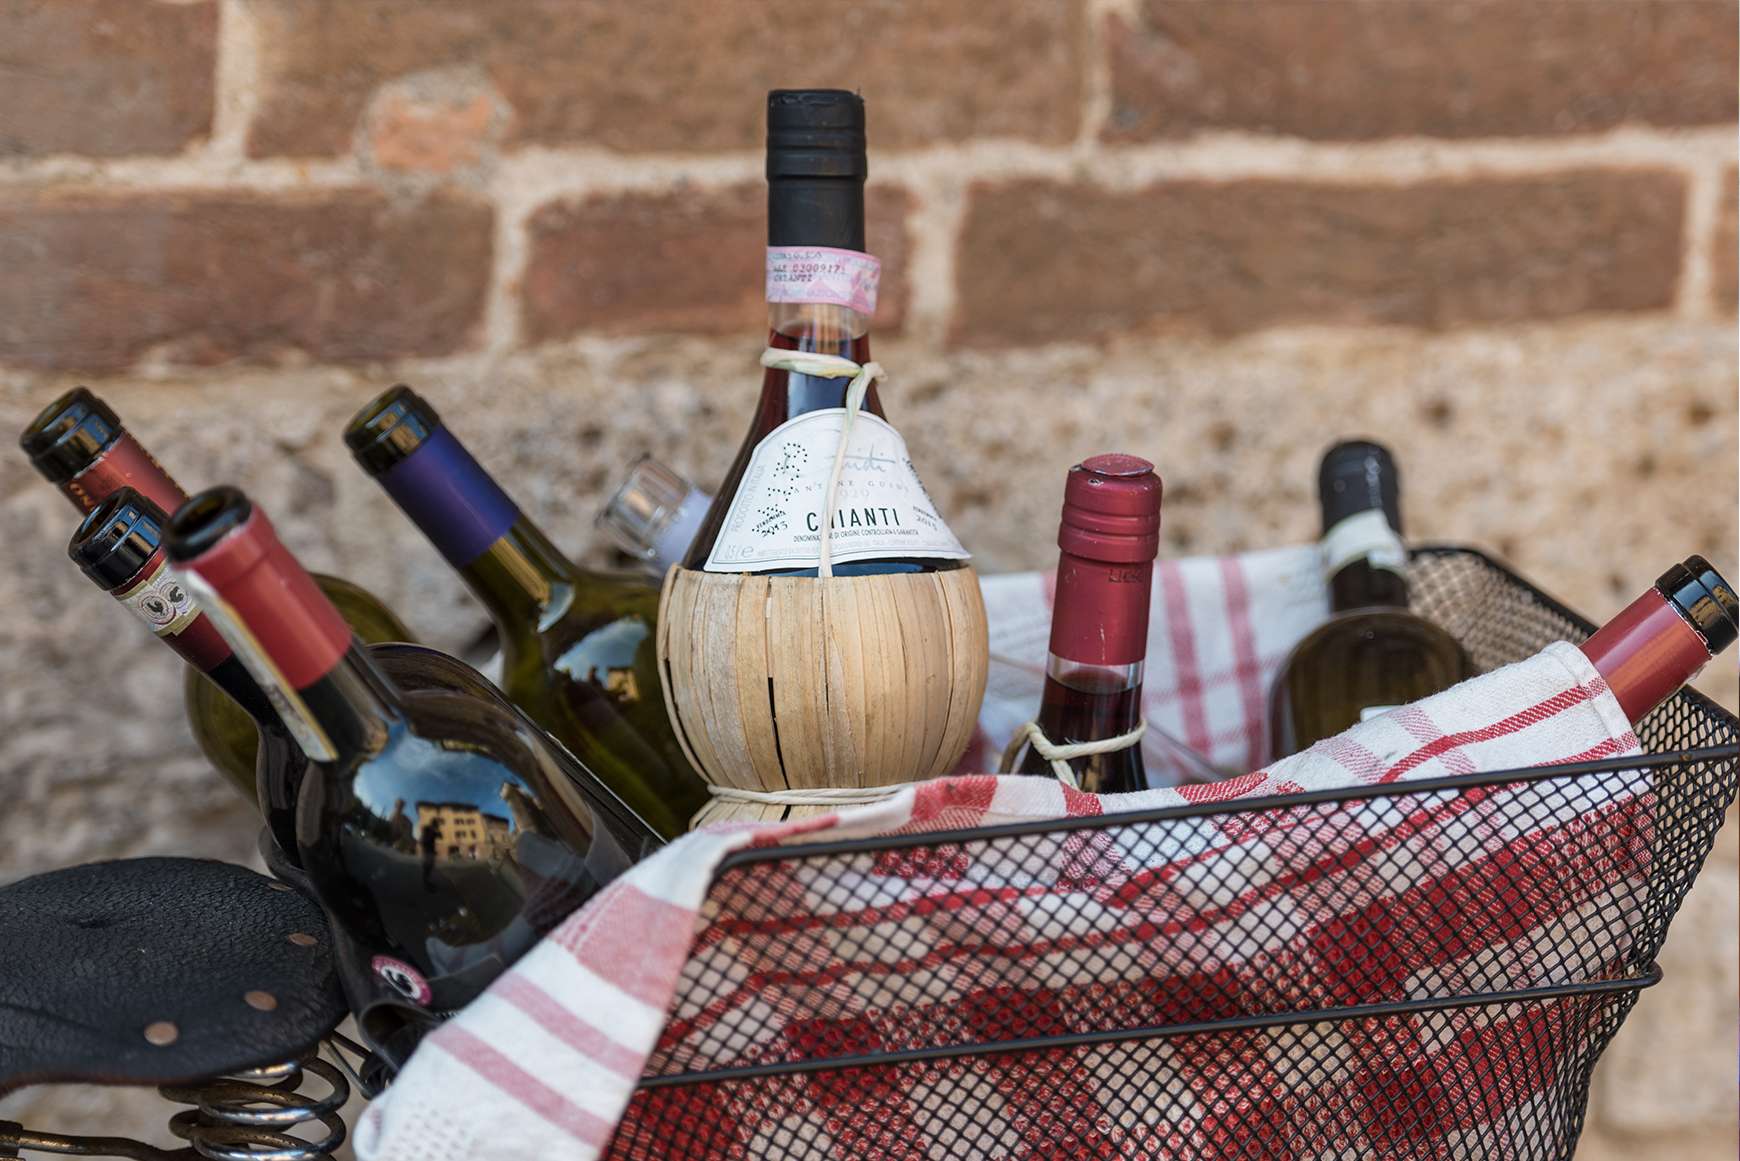 Bottles of wine in a basket from the Chianti Region of Italy